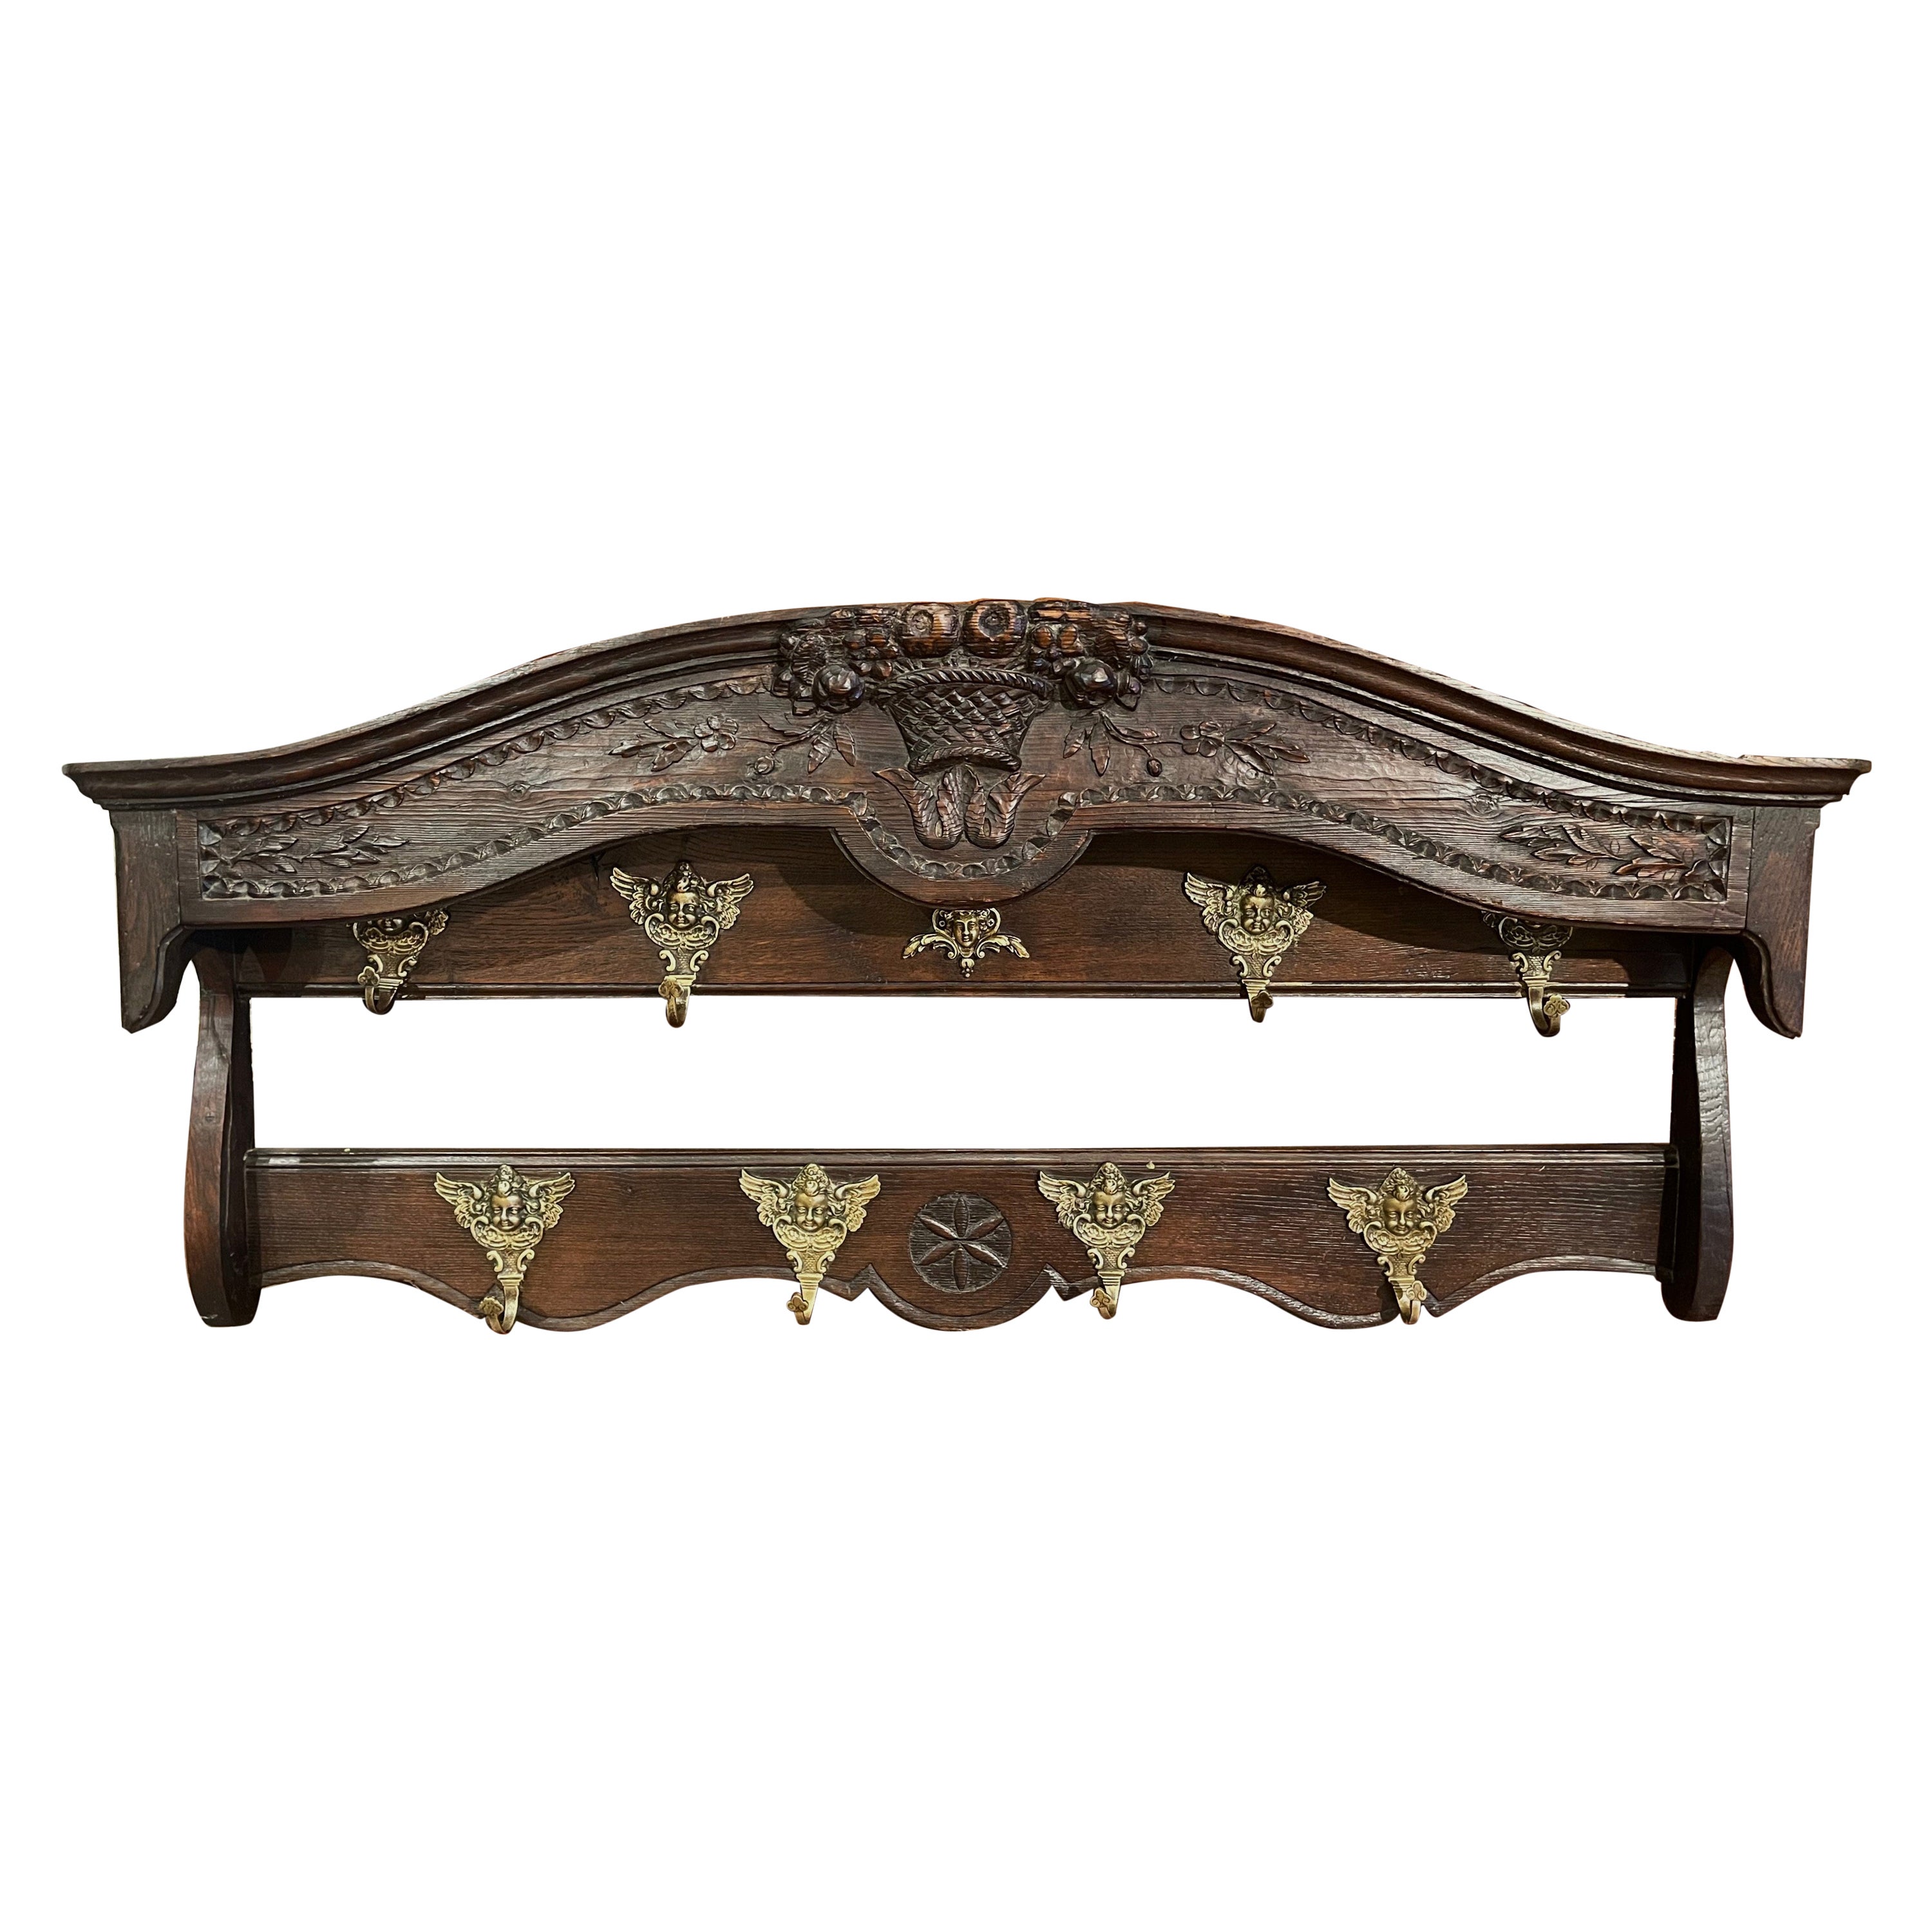 Mid-19th Century French Carved Oak Hanging Shelf with Hooks from Normandy For Sale